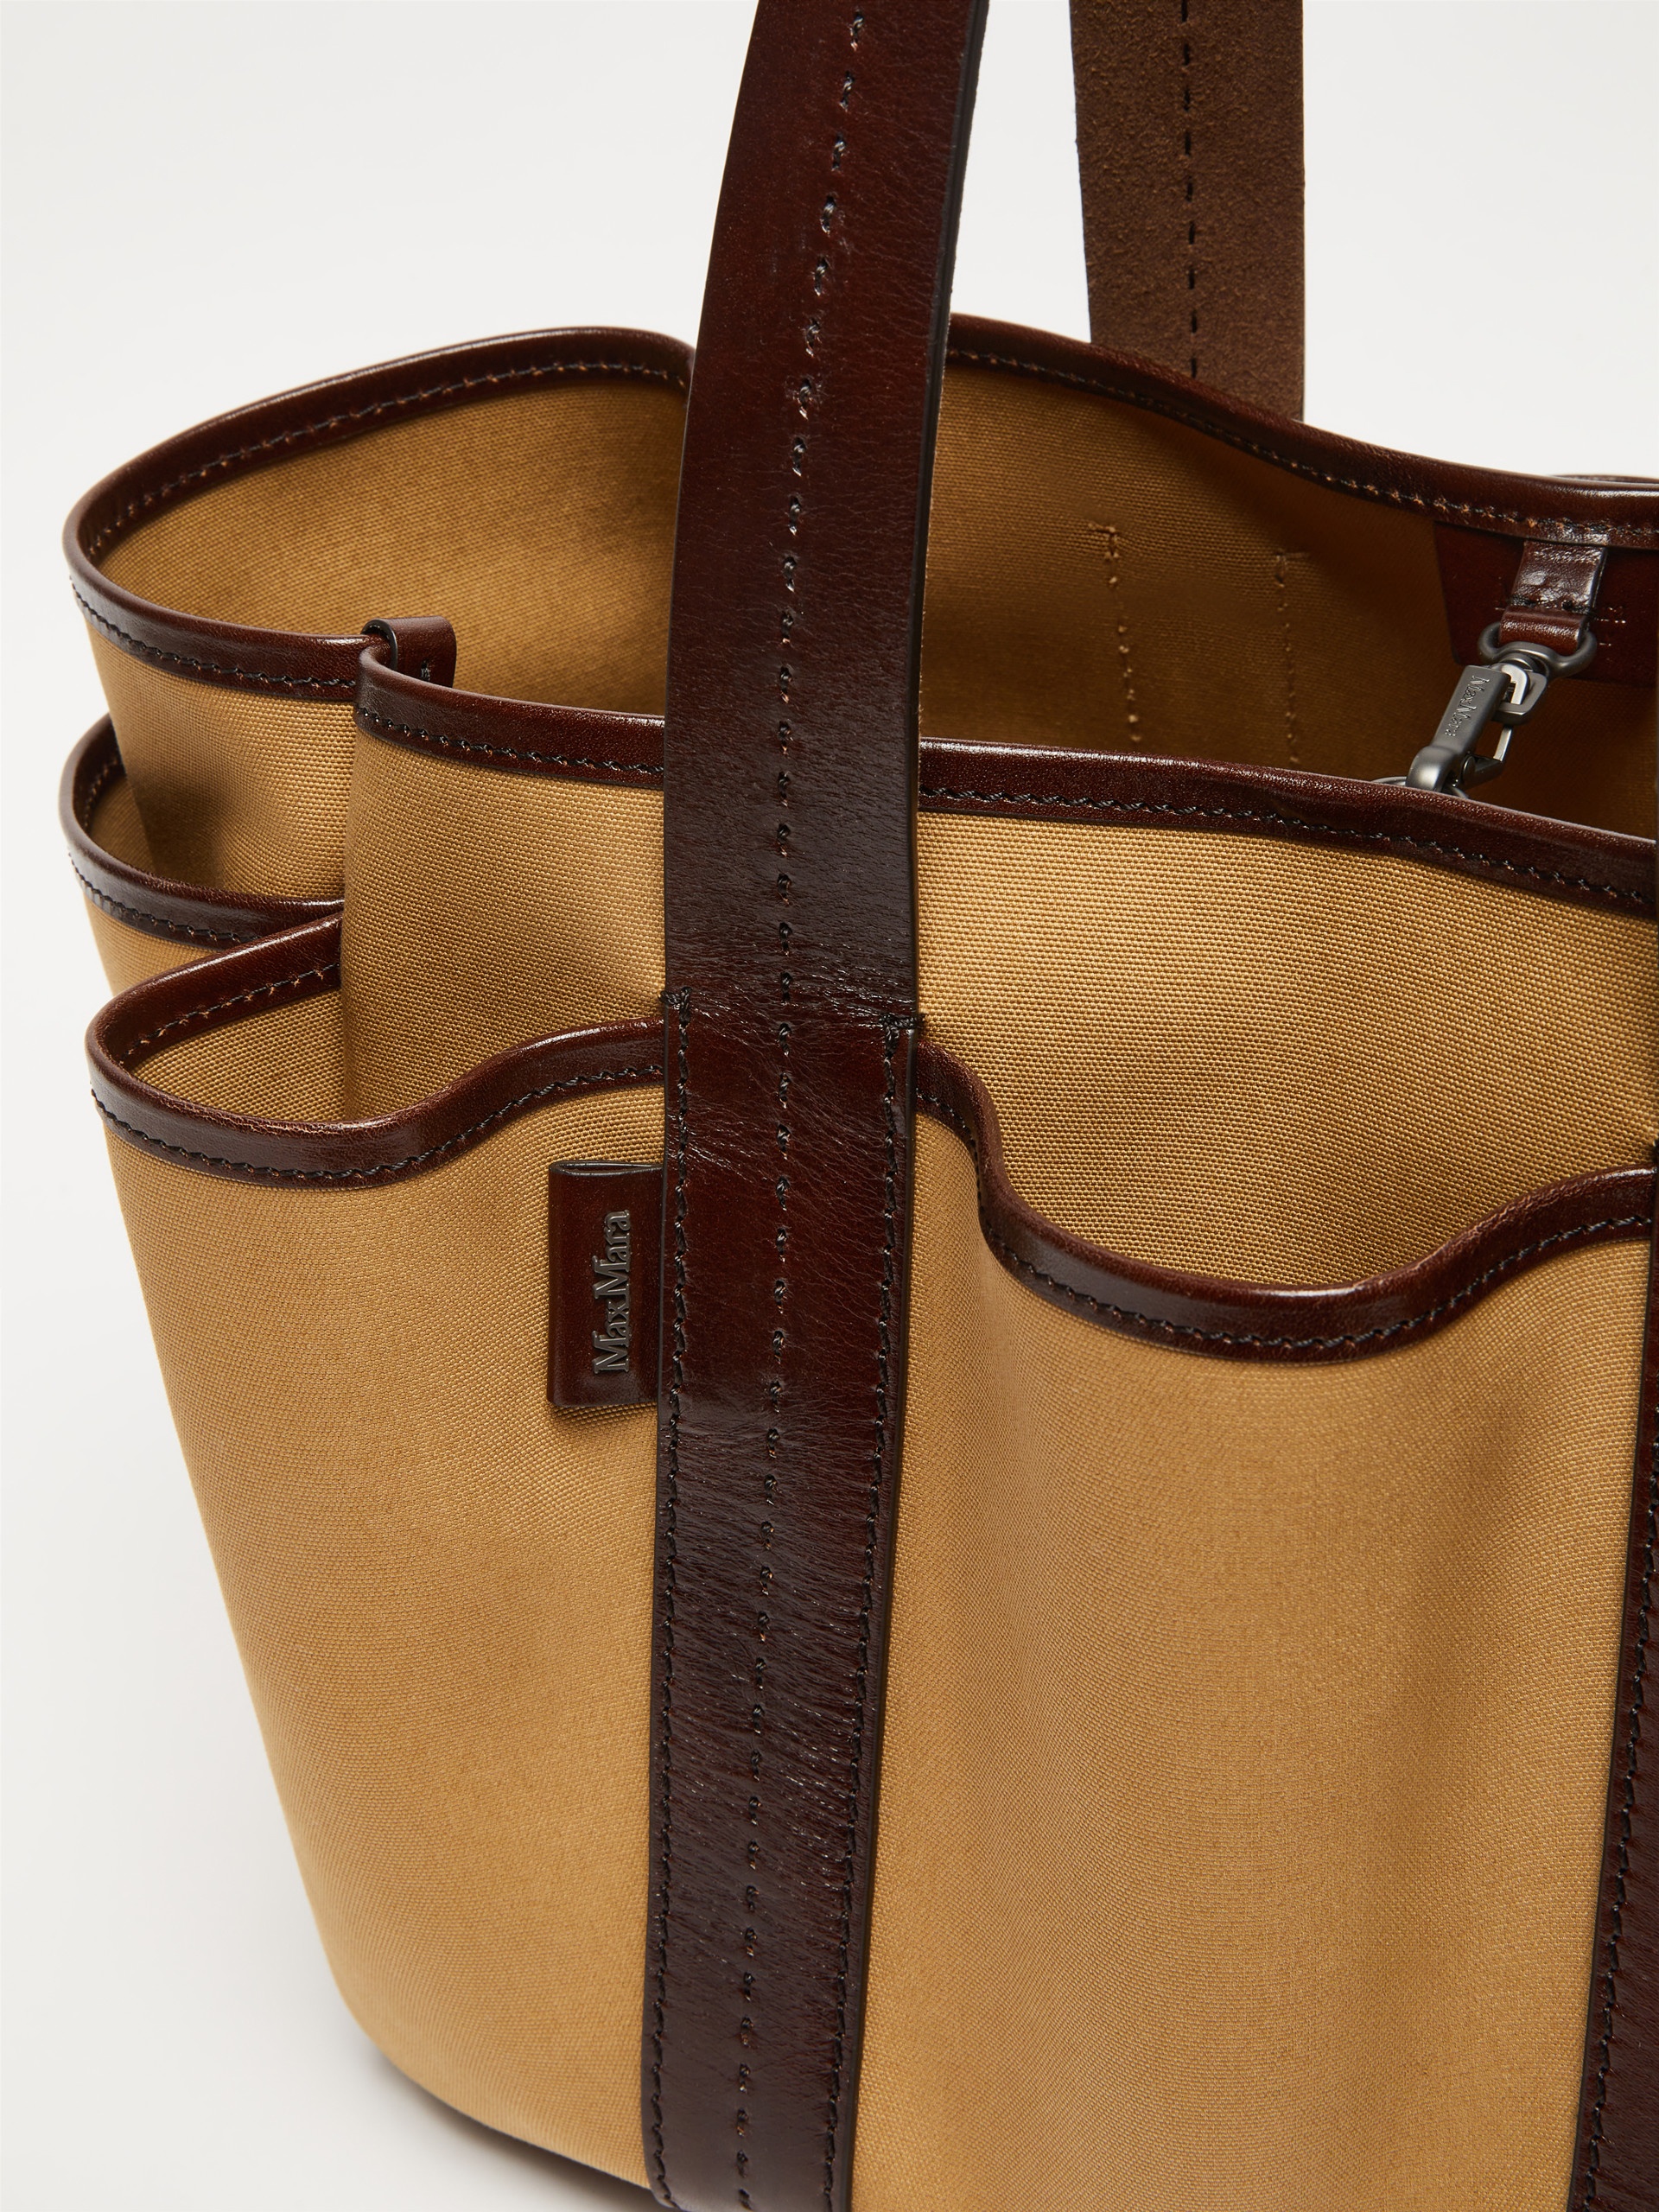 Canvas and leather Giardiniera tote bag - 4